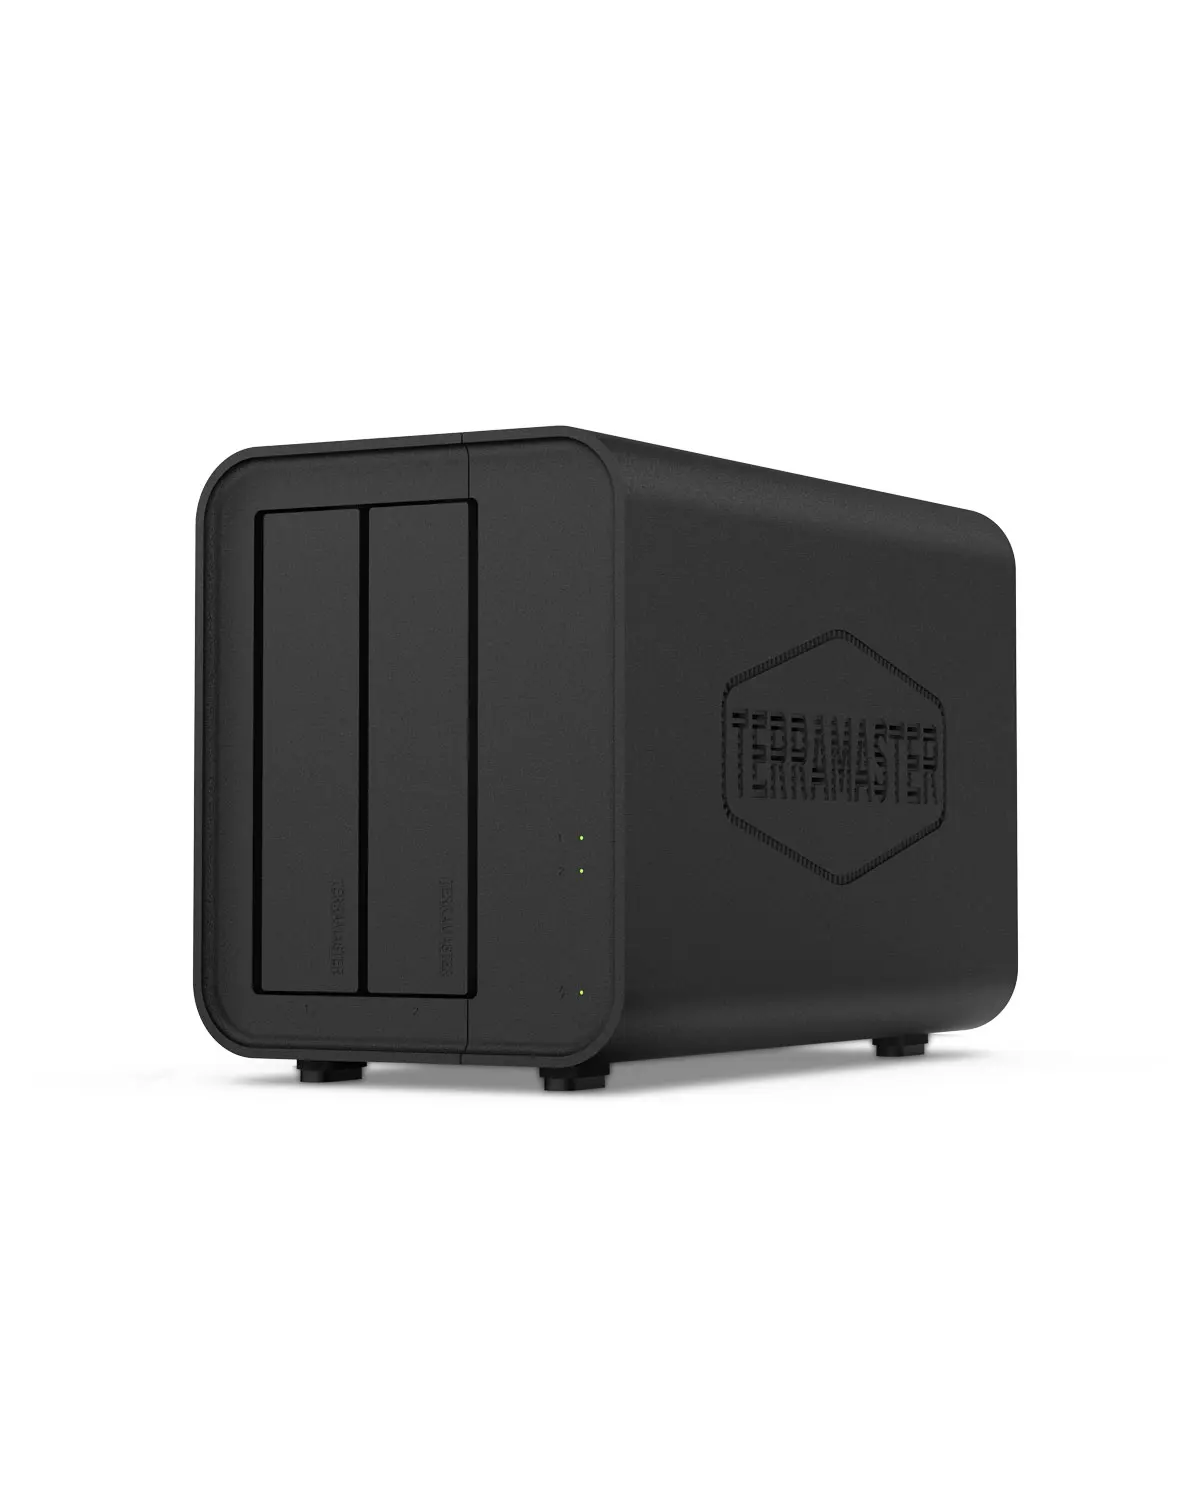 TERRAMASTER F2-424 NAS Storage 2Bay - Quad-Core, 8GB, 2.5GbE Port , Network Attached Storage with High Performance (Diskless)